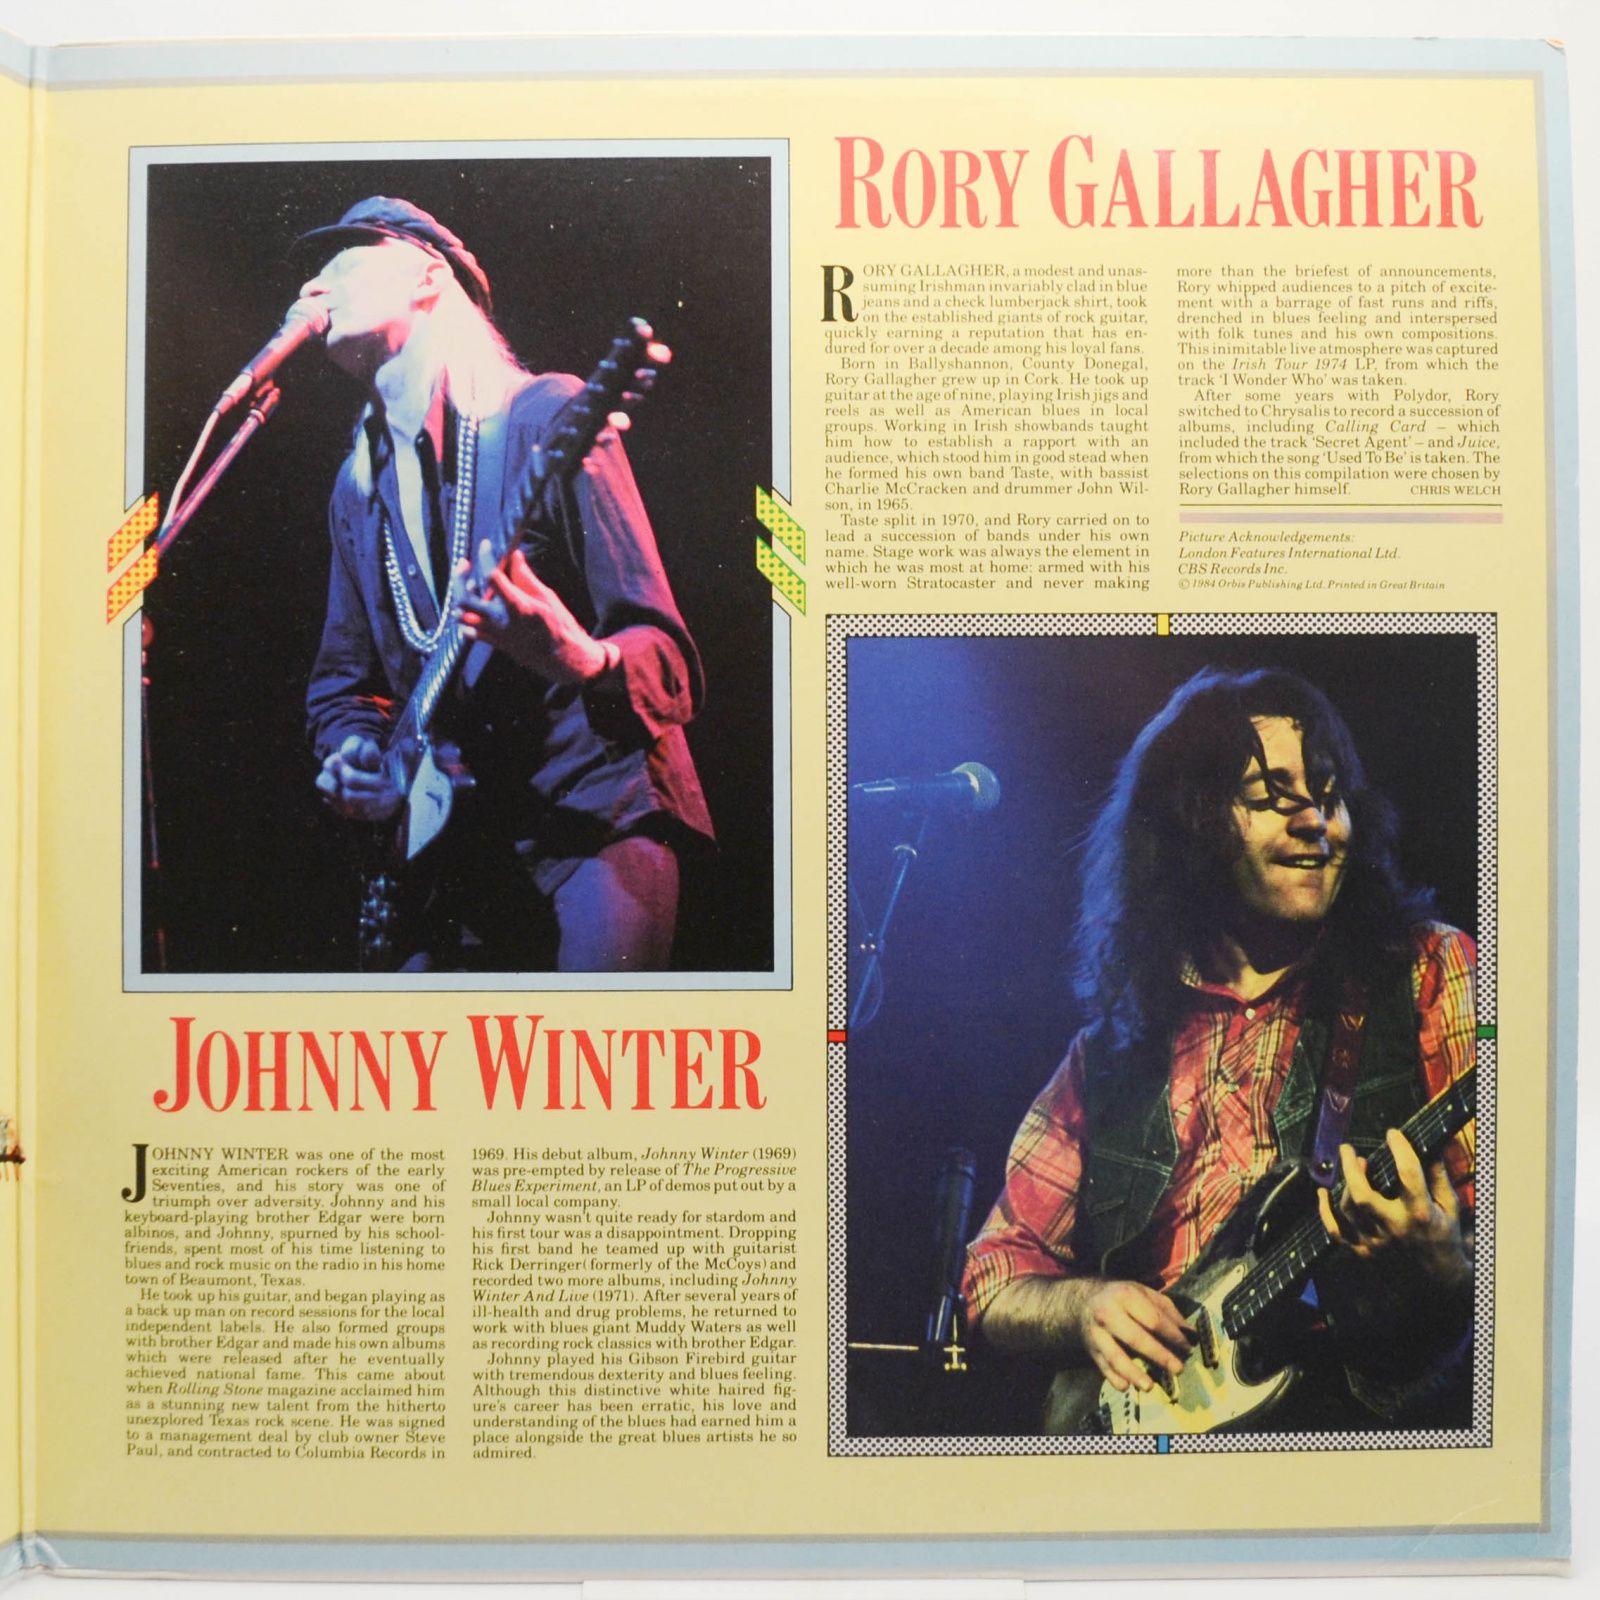 Eric Clapton / Jeff Beck / Johnny Winter / Rory Gallagher — The History Of Rock (Volume Twenty Five) (2LP, UK), 1984